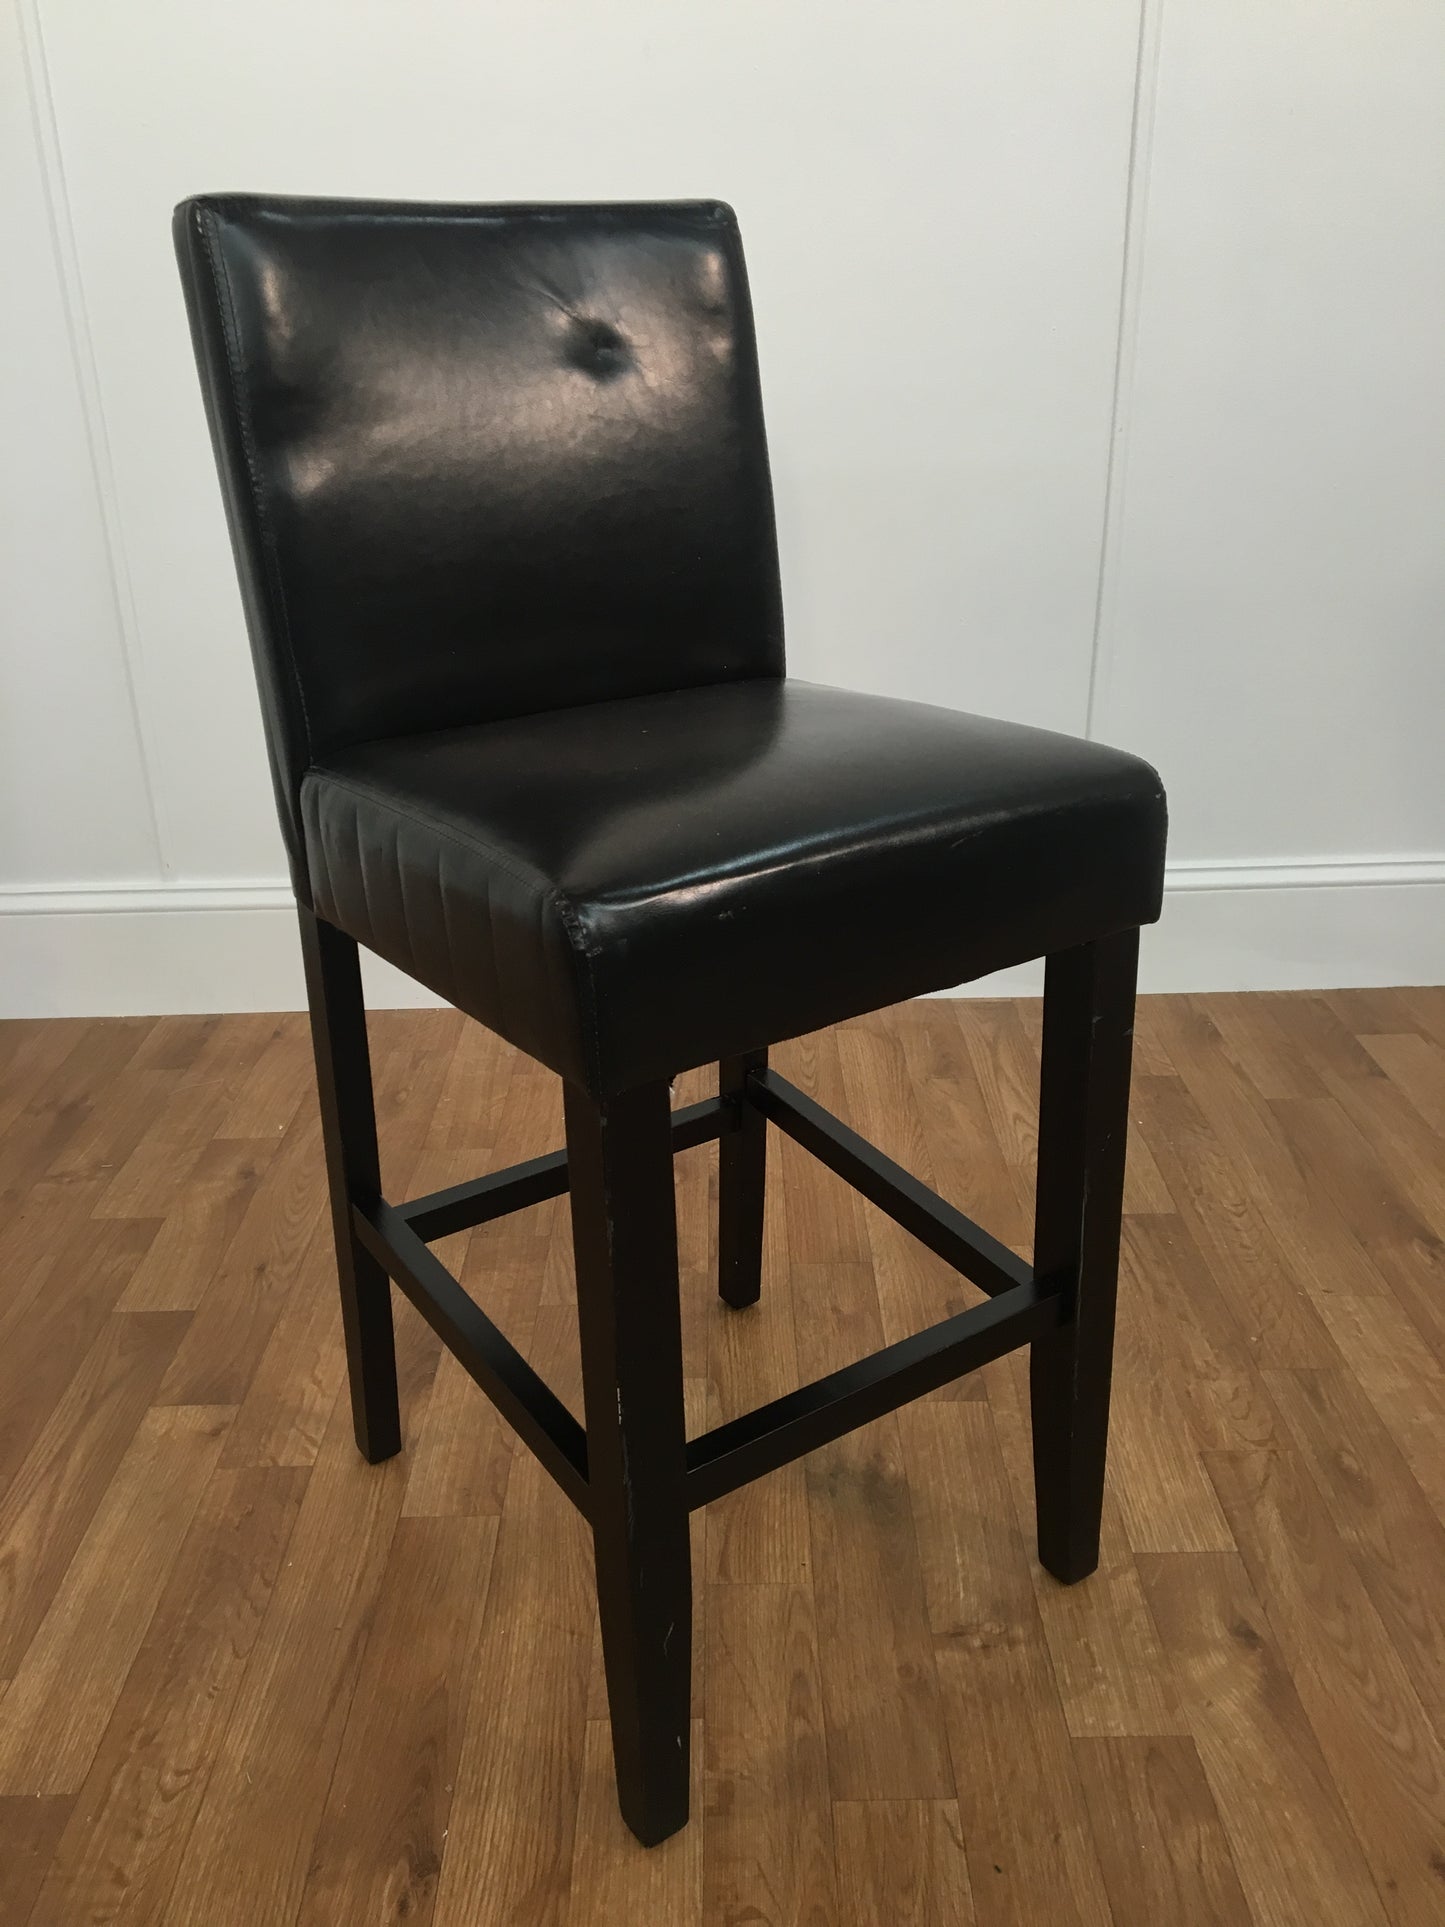 BLACK LEATHER LEATHER HIGH CHAIR